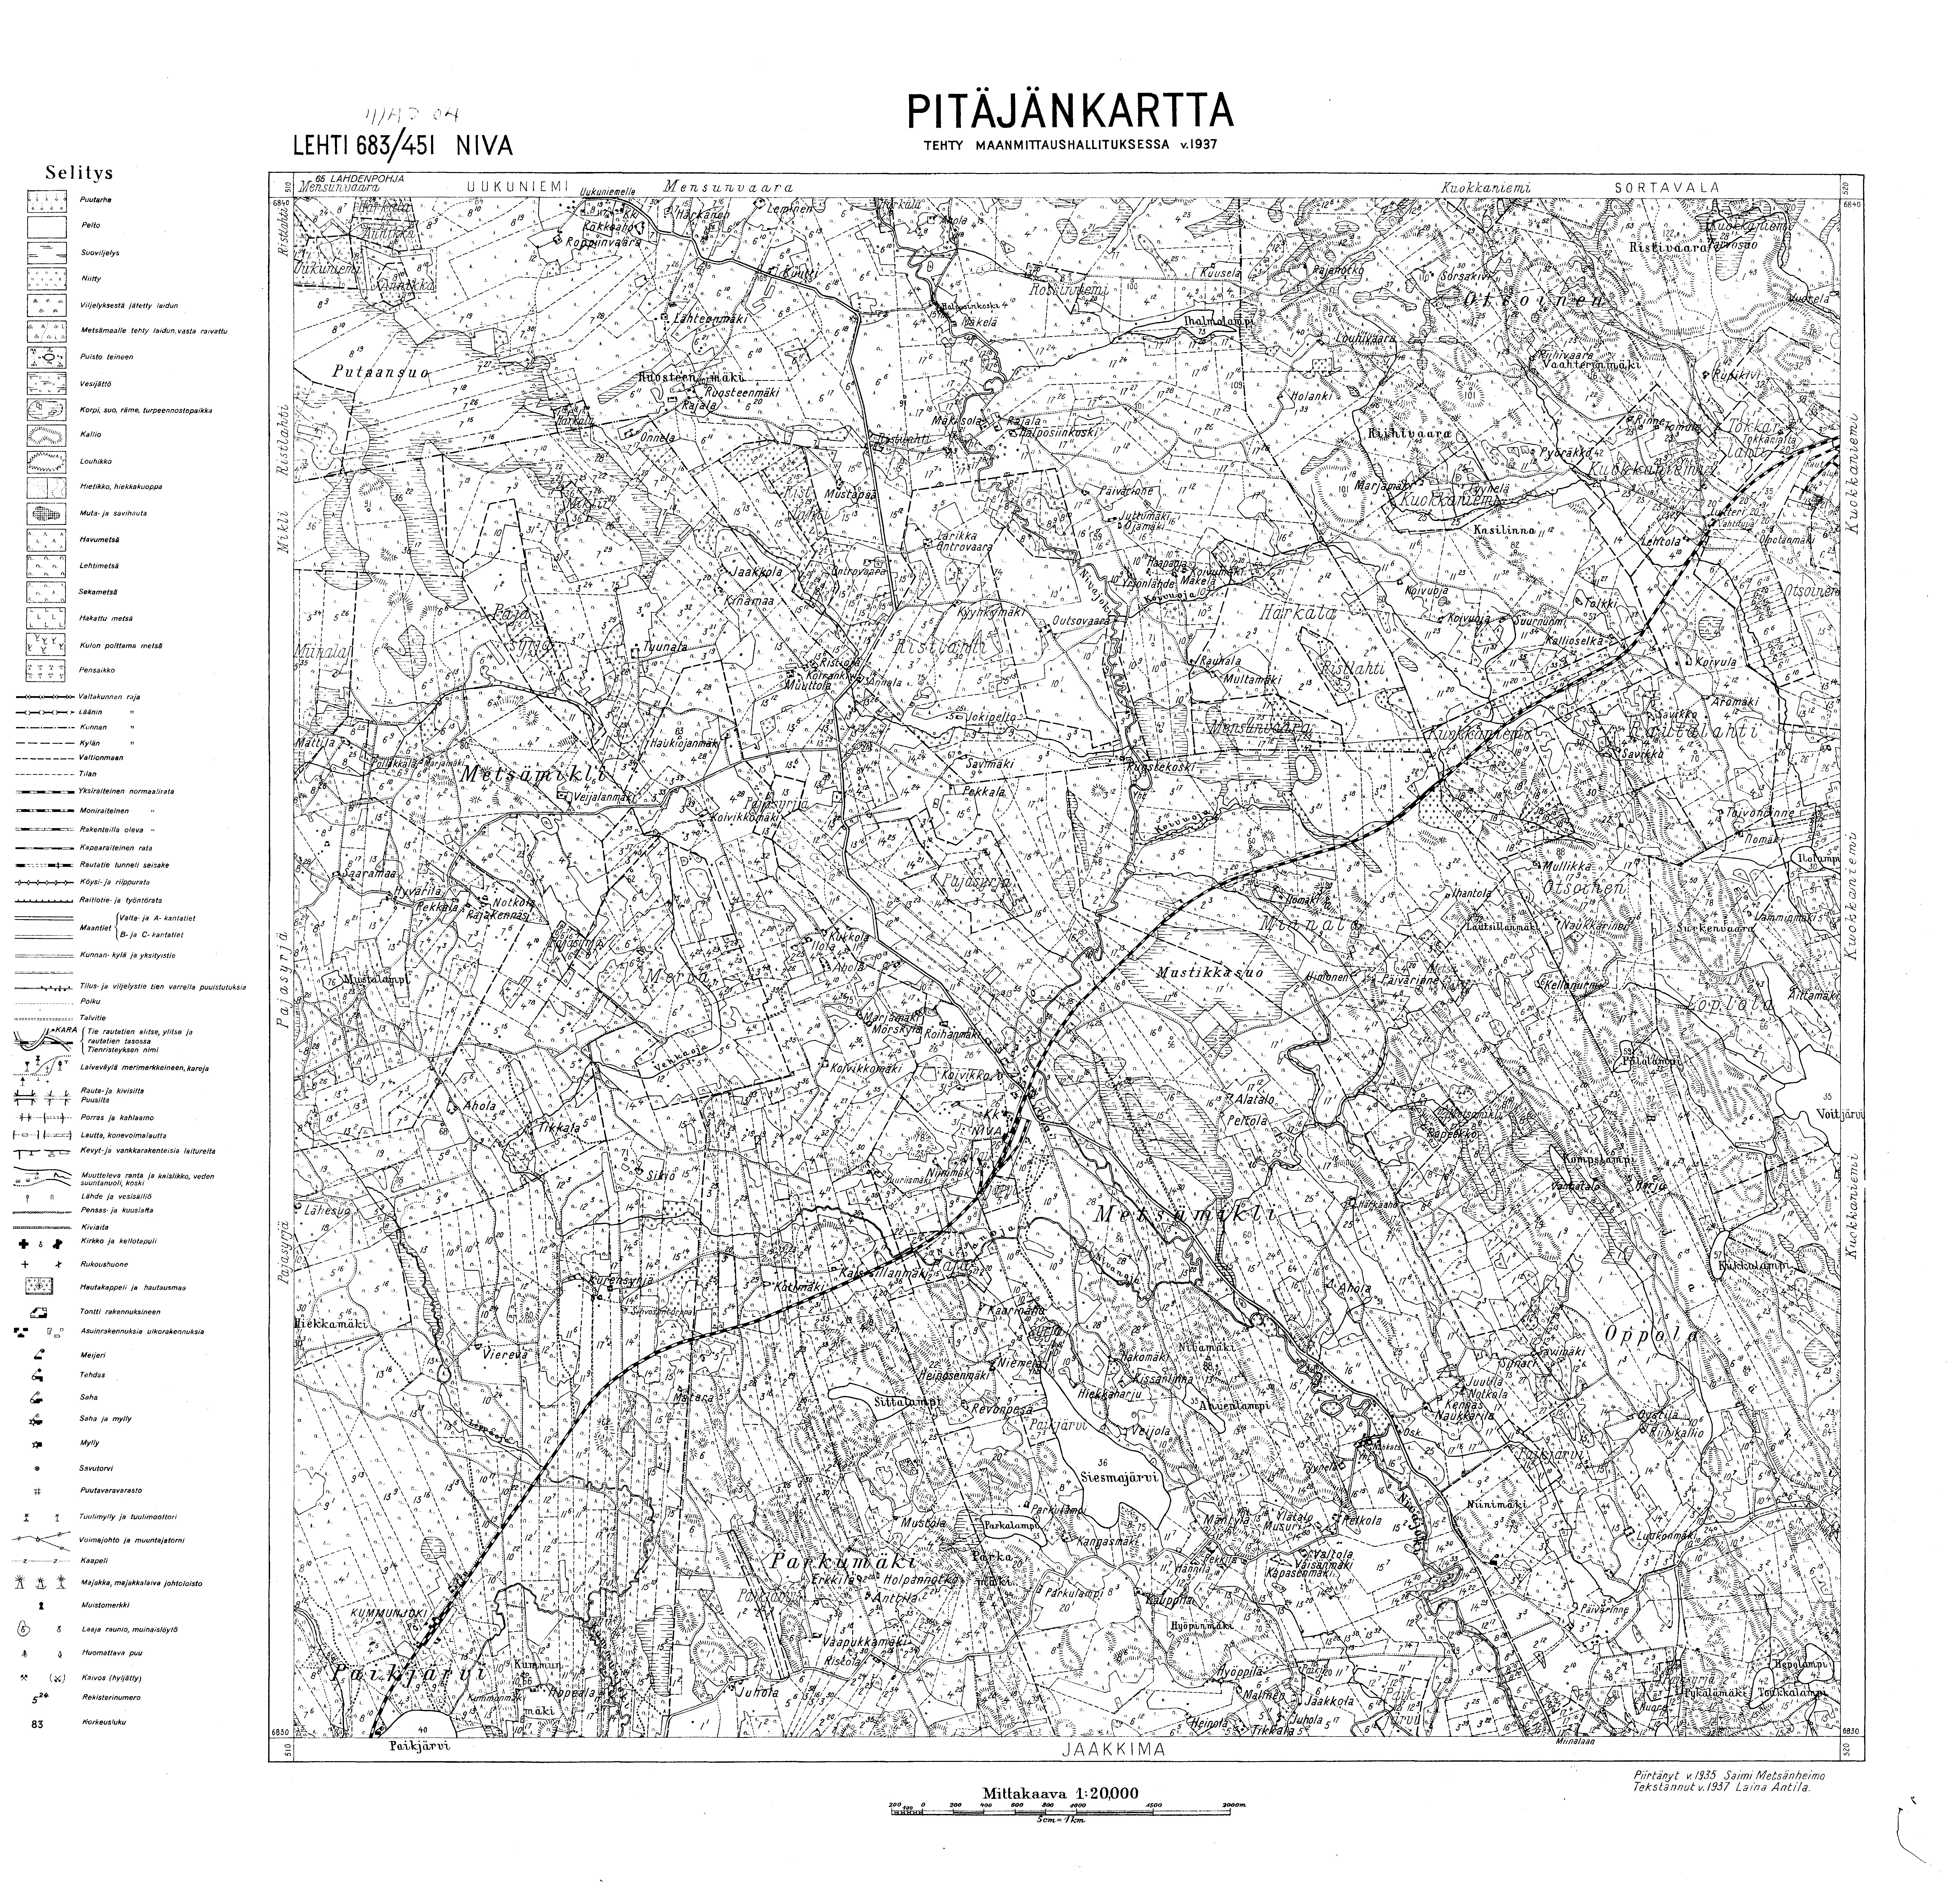 Niva (Niva. Niva. Pitäjänkartta 414204. Parish map from 1935. Use the zooming tool to explore in higher level of detail. Obtain as a quality print or high resolution image